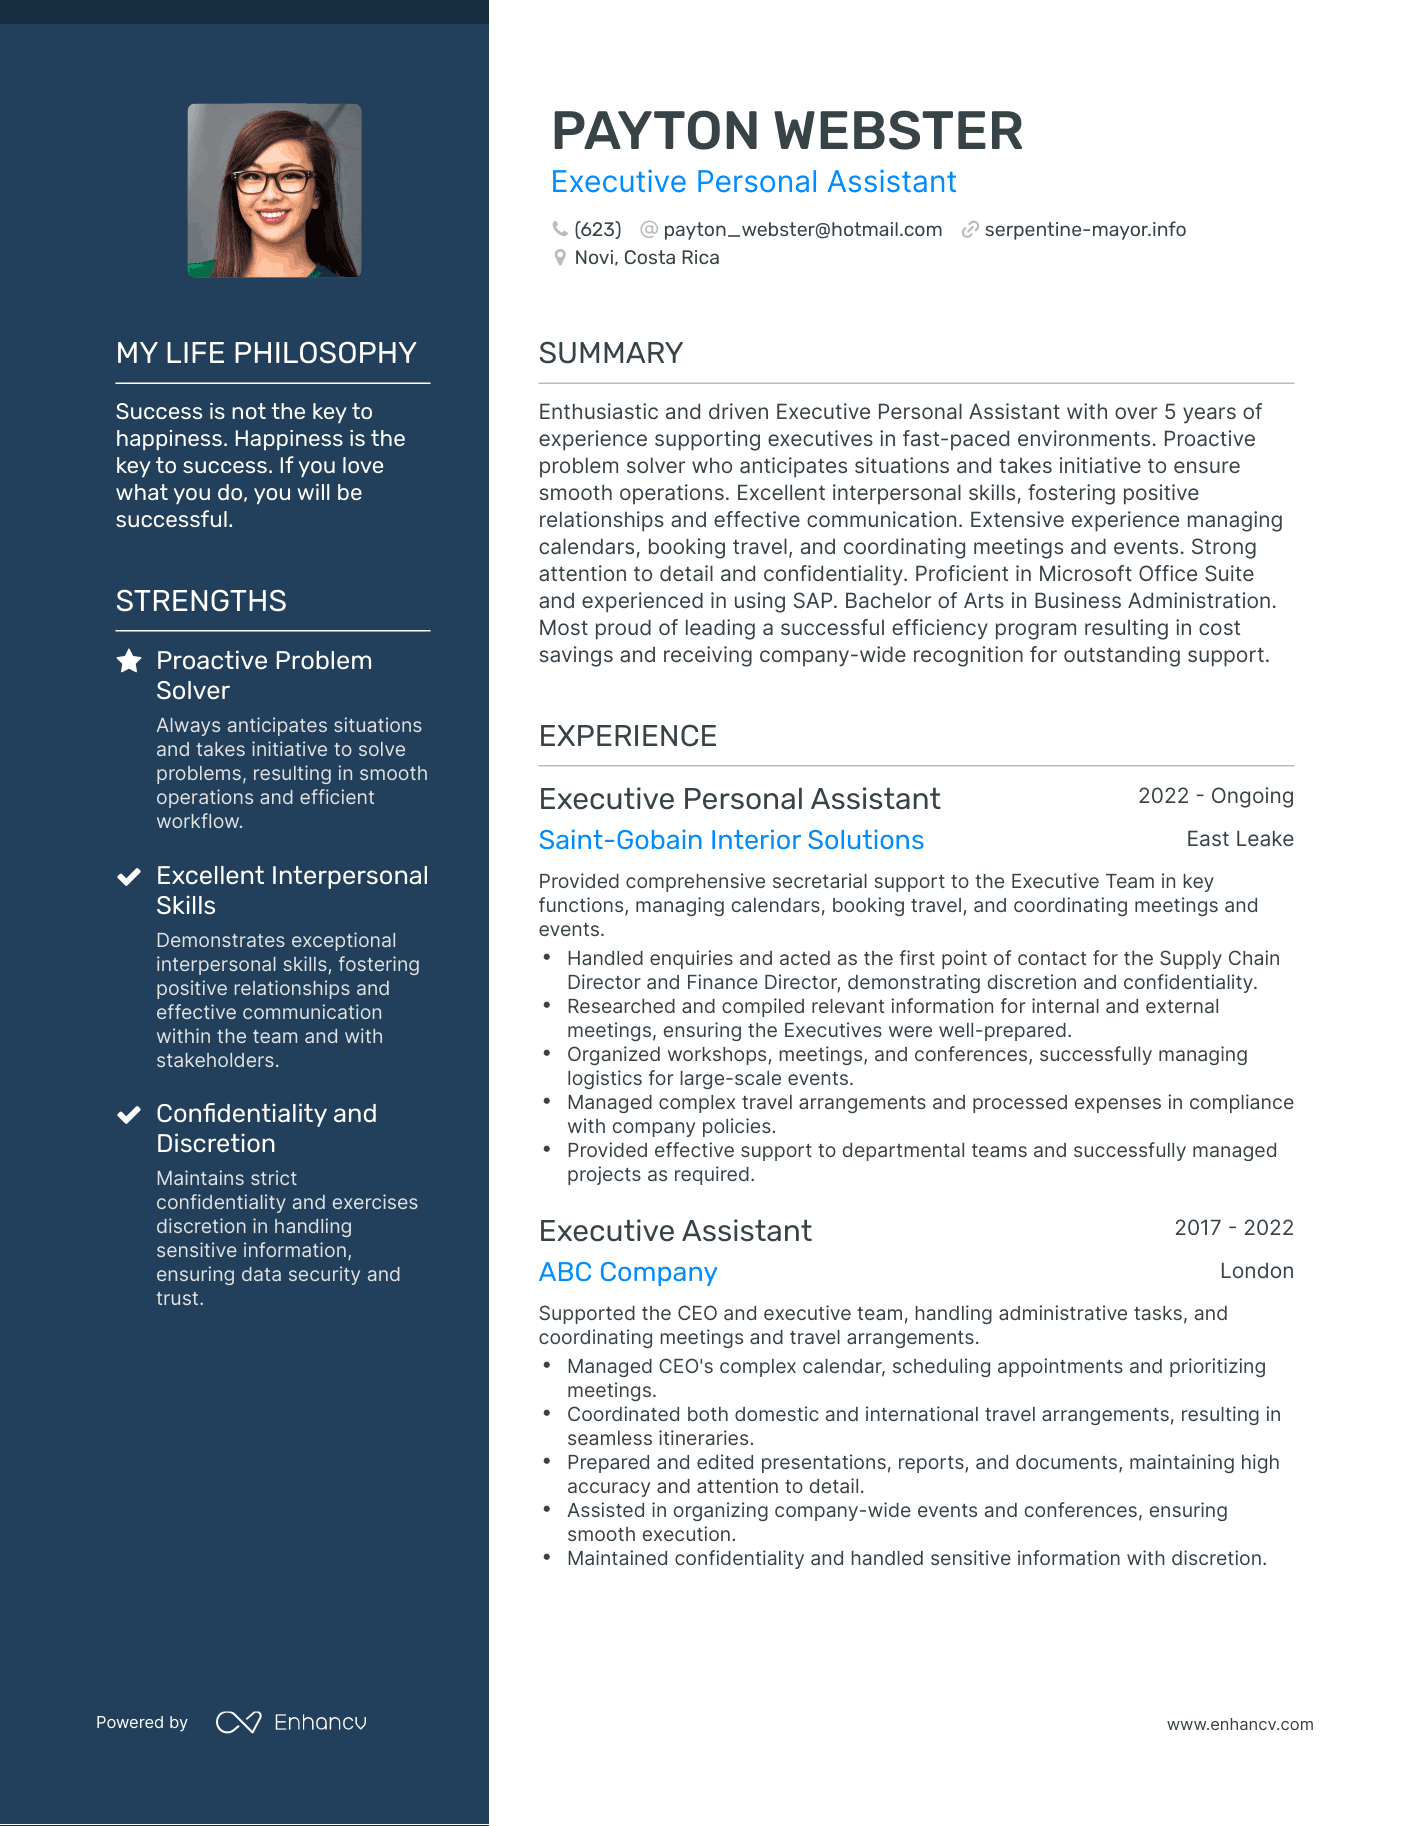 Executive Personal Assistant resume example